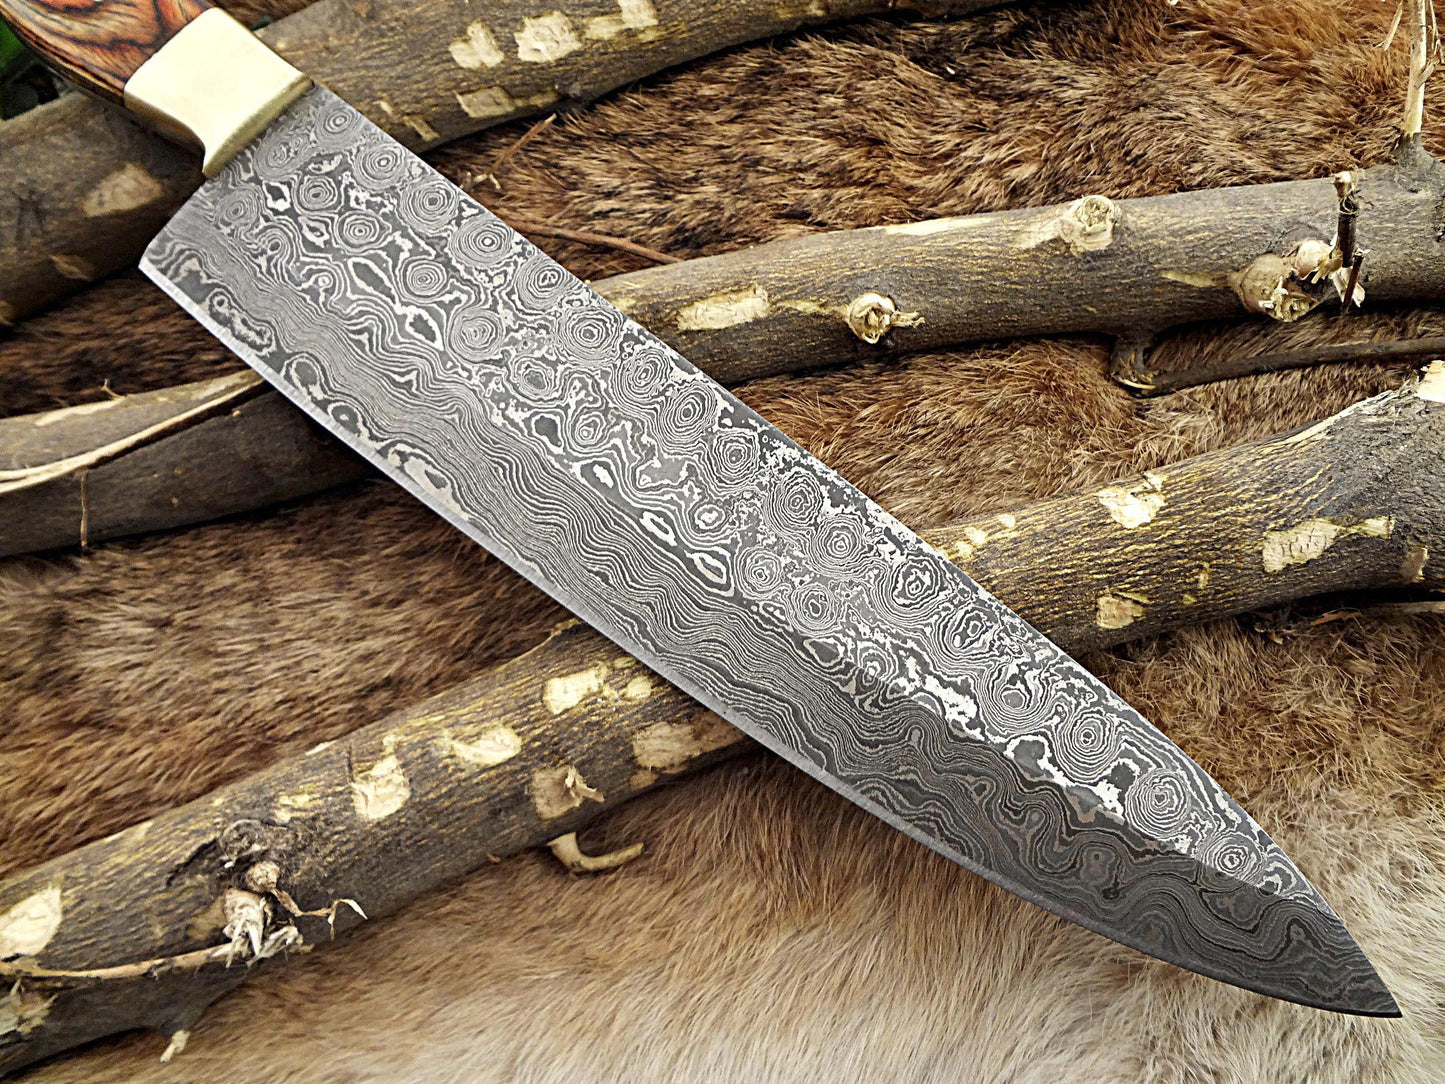 Damascus Steel kitchen Knife 13 Inches full tang 8.5" long Hand Forged blade, 2 Tone Dollar wood and brass bolster scale